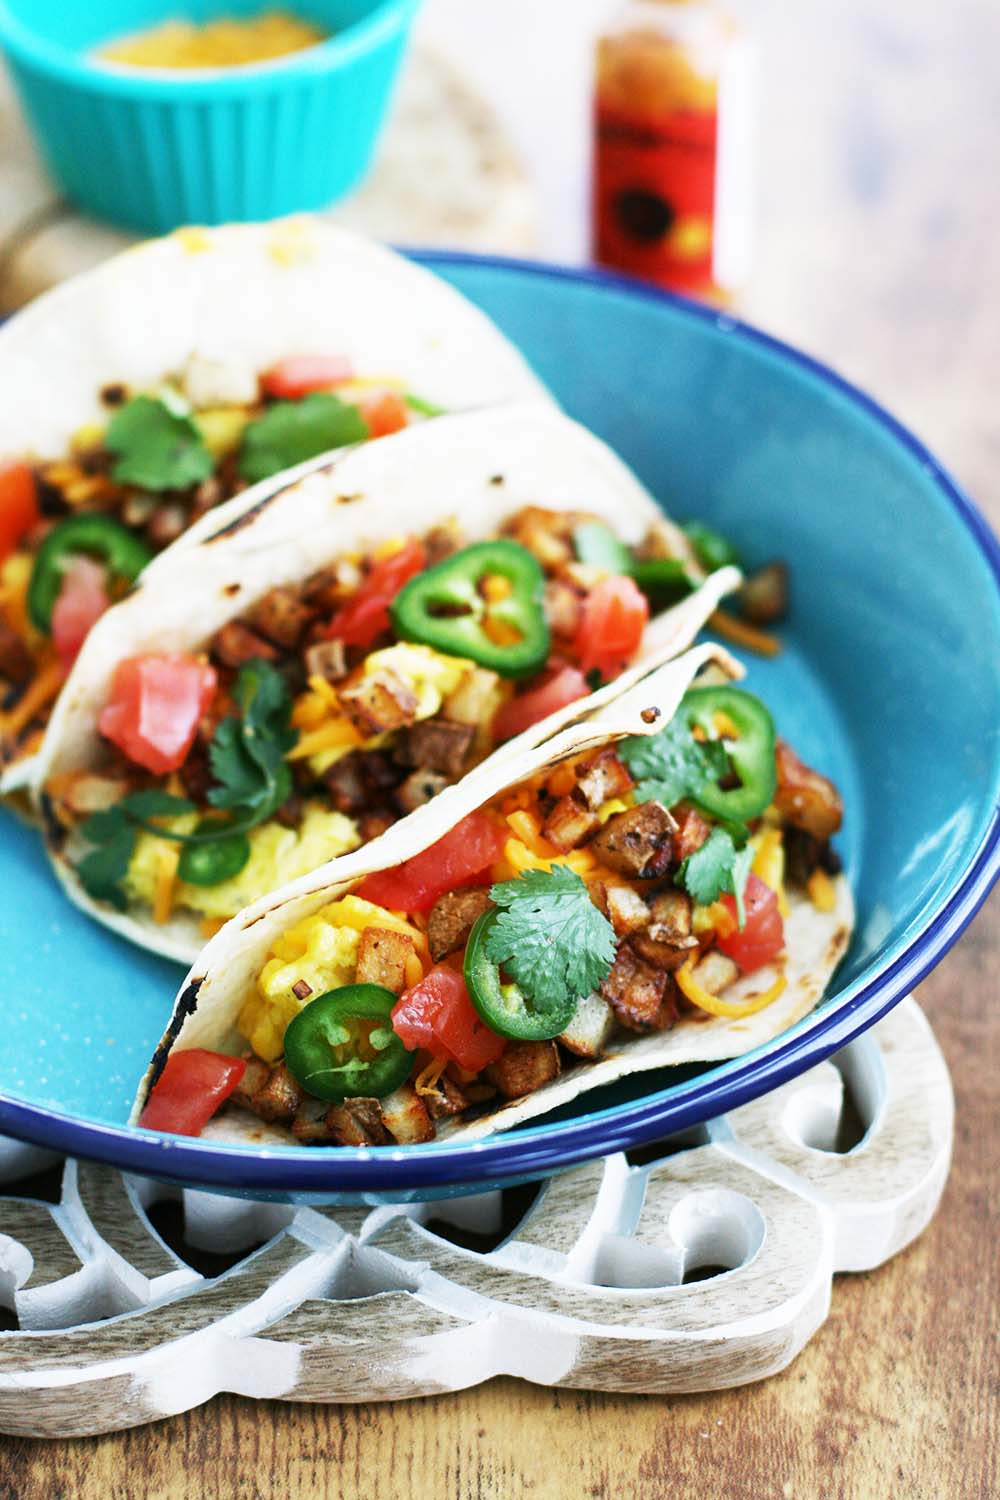 Egg & potato breakfast tacos: Simple and so cheap to make! Click through for recipe.